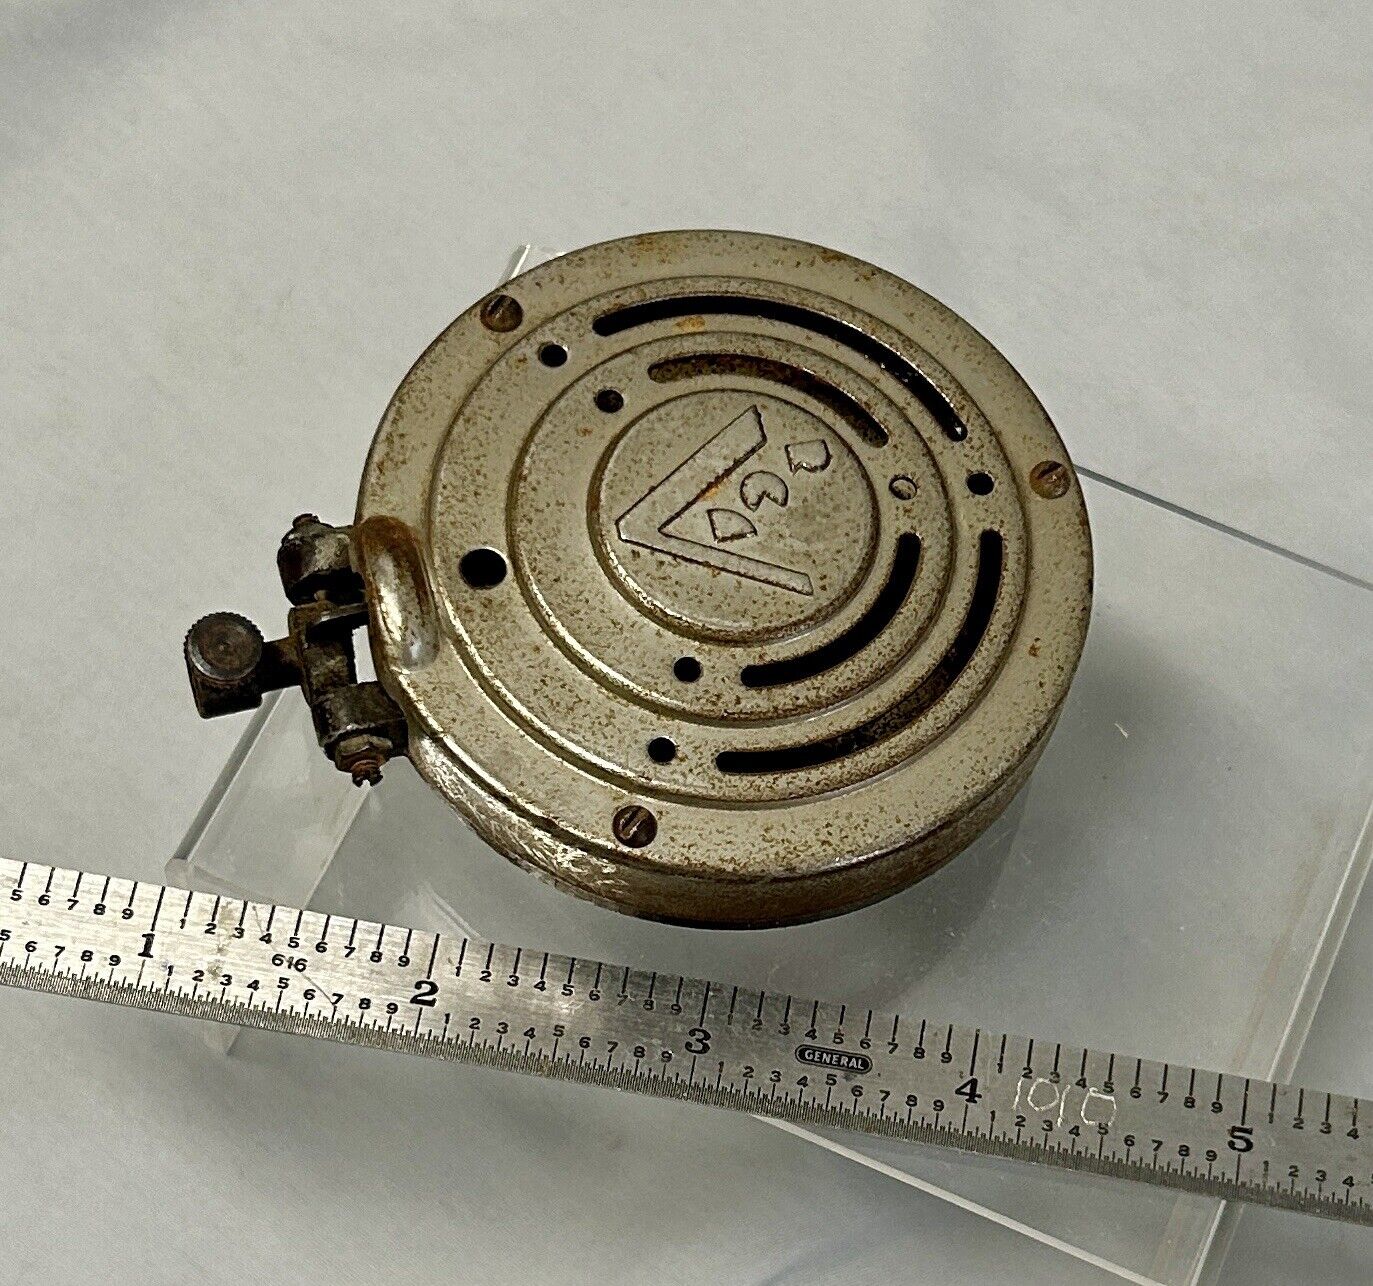 RCA VICTOR DISC PHONOGRAPH REPRODUCER